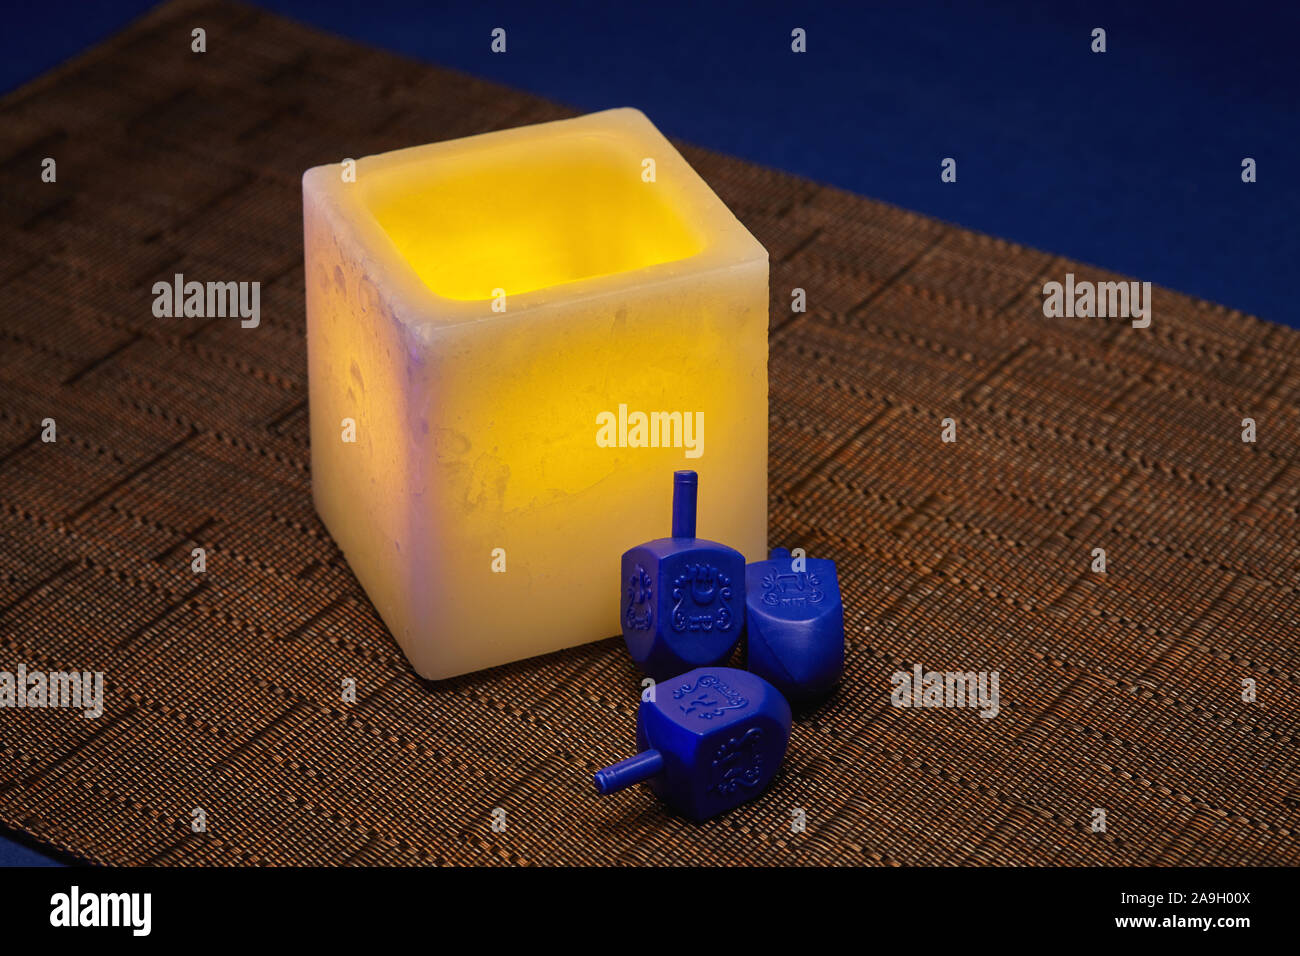 Hanukkah still life of glowing yellow electric candle and blue dreidels Stock Photo